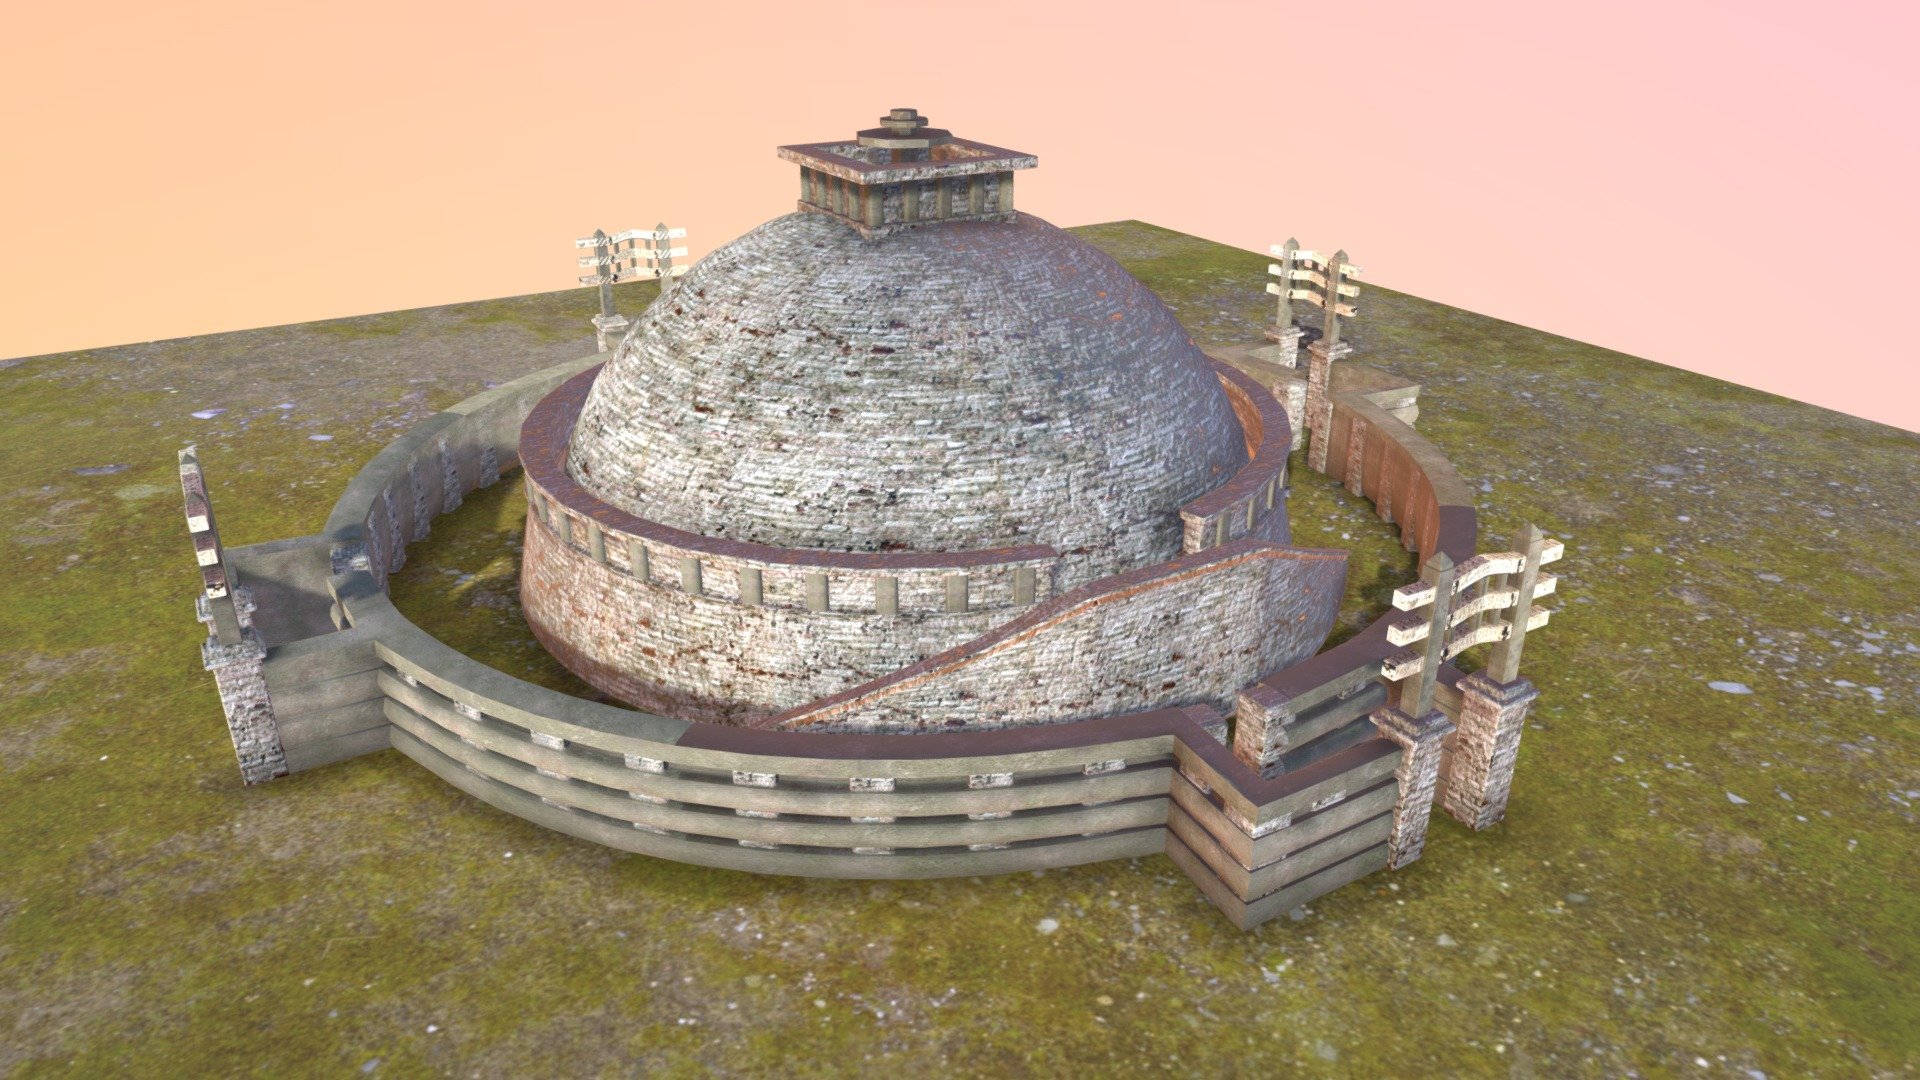 The Great Stupa at Sanchi higher quality scan by Rayleighev on DeviantArt